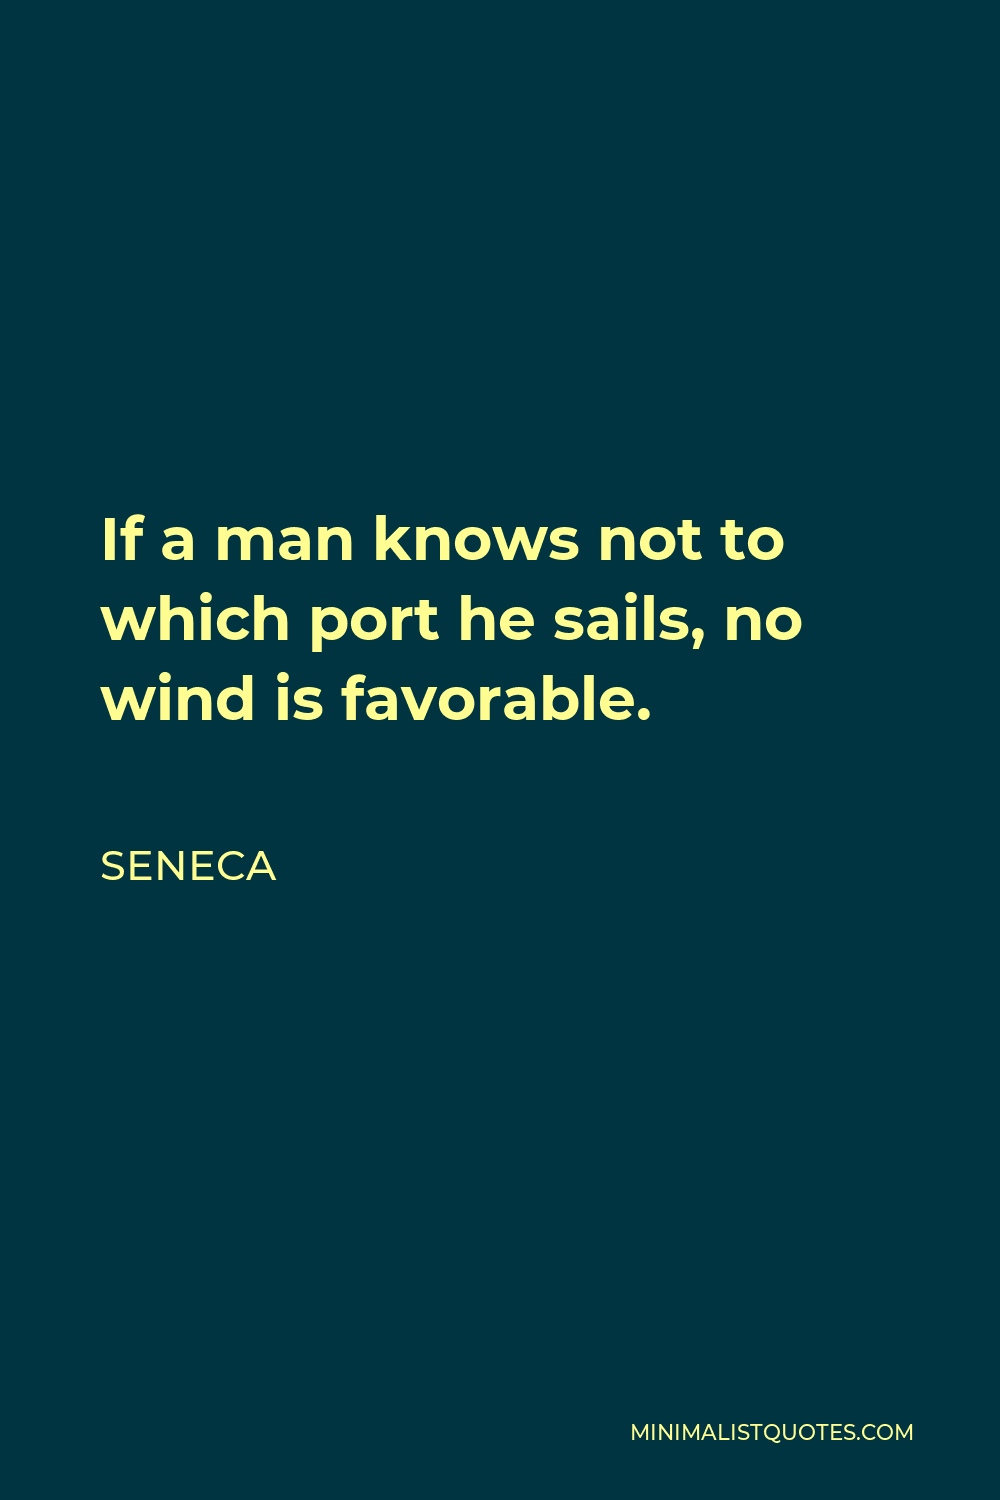 Seneca Quote - If a man knows not to which port he sails, no wind is favorable.